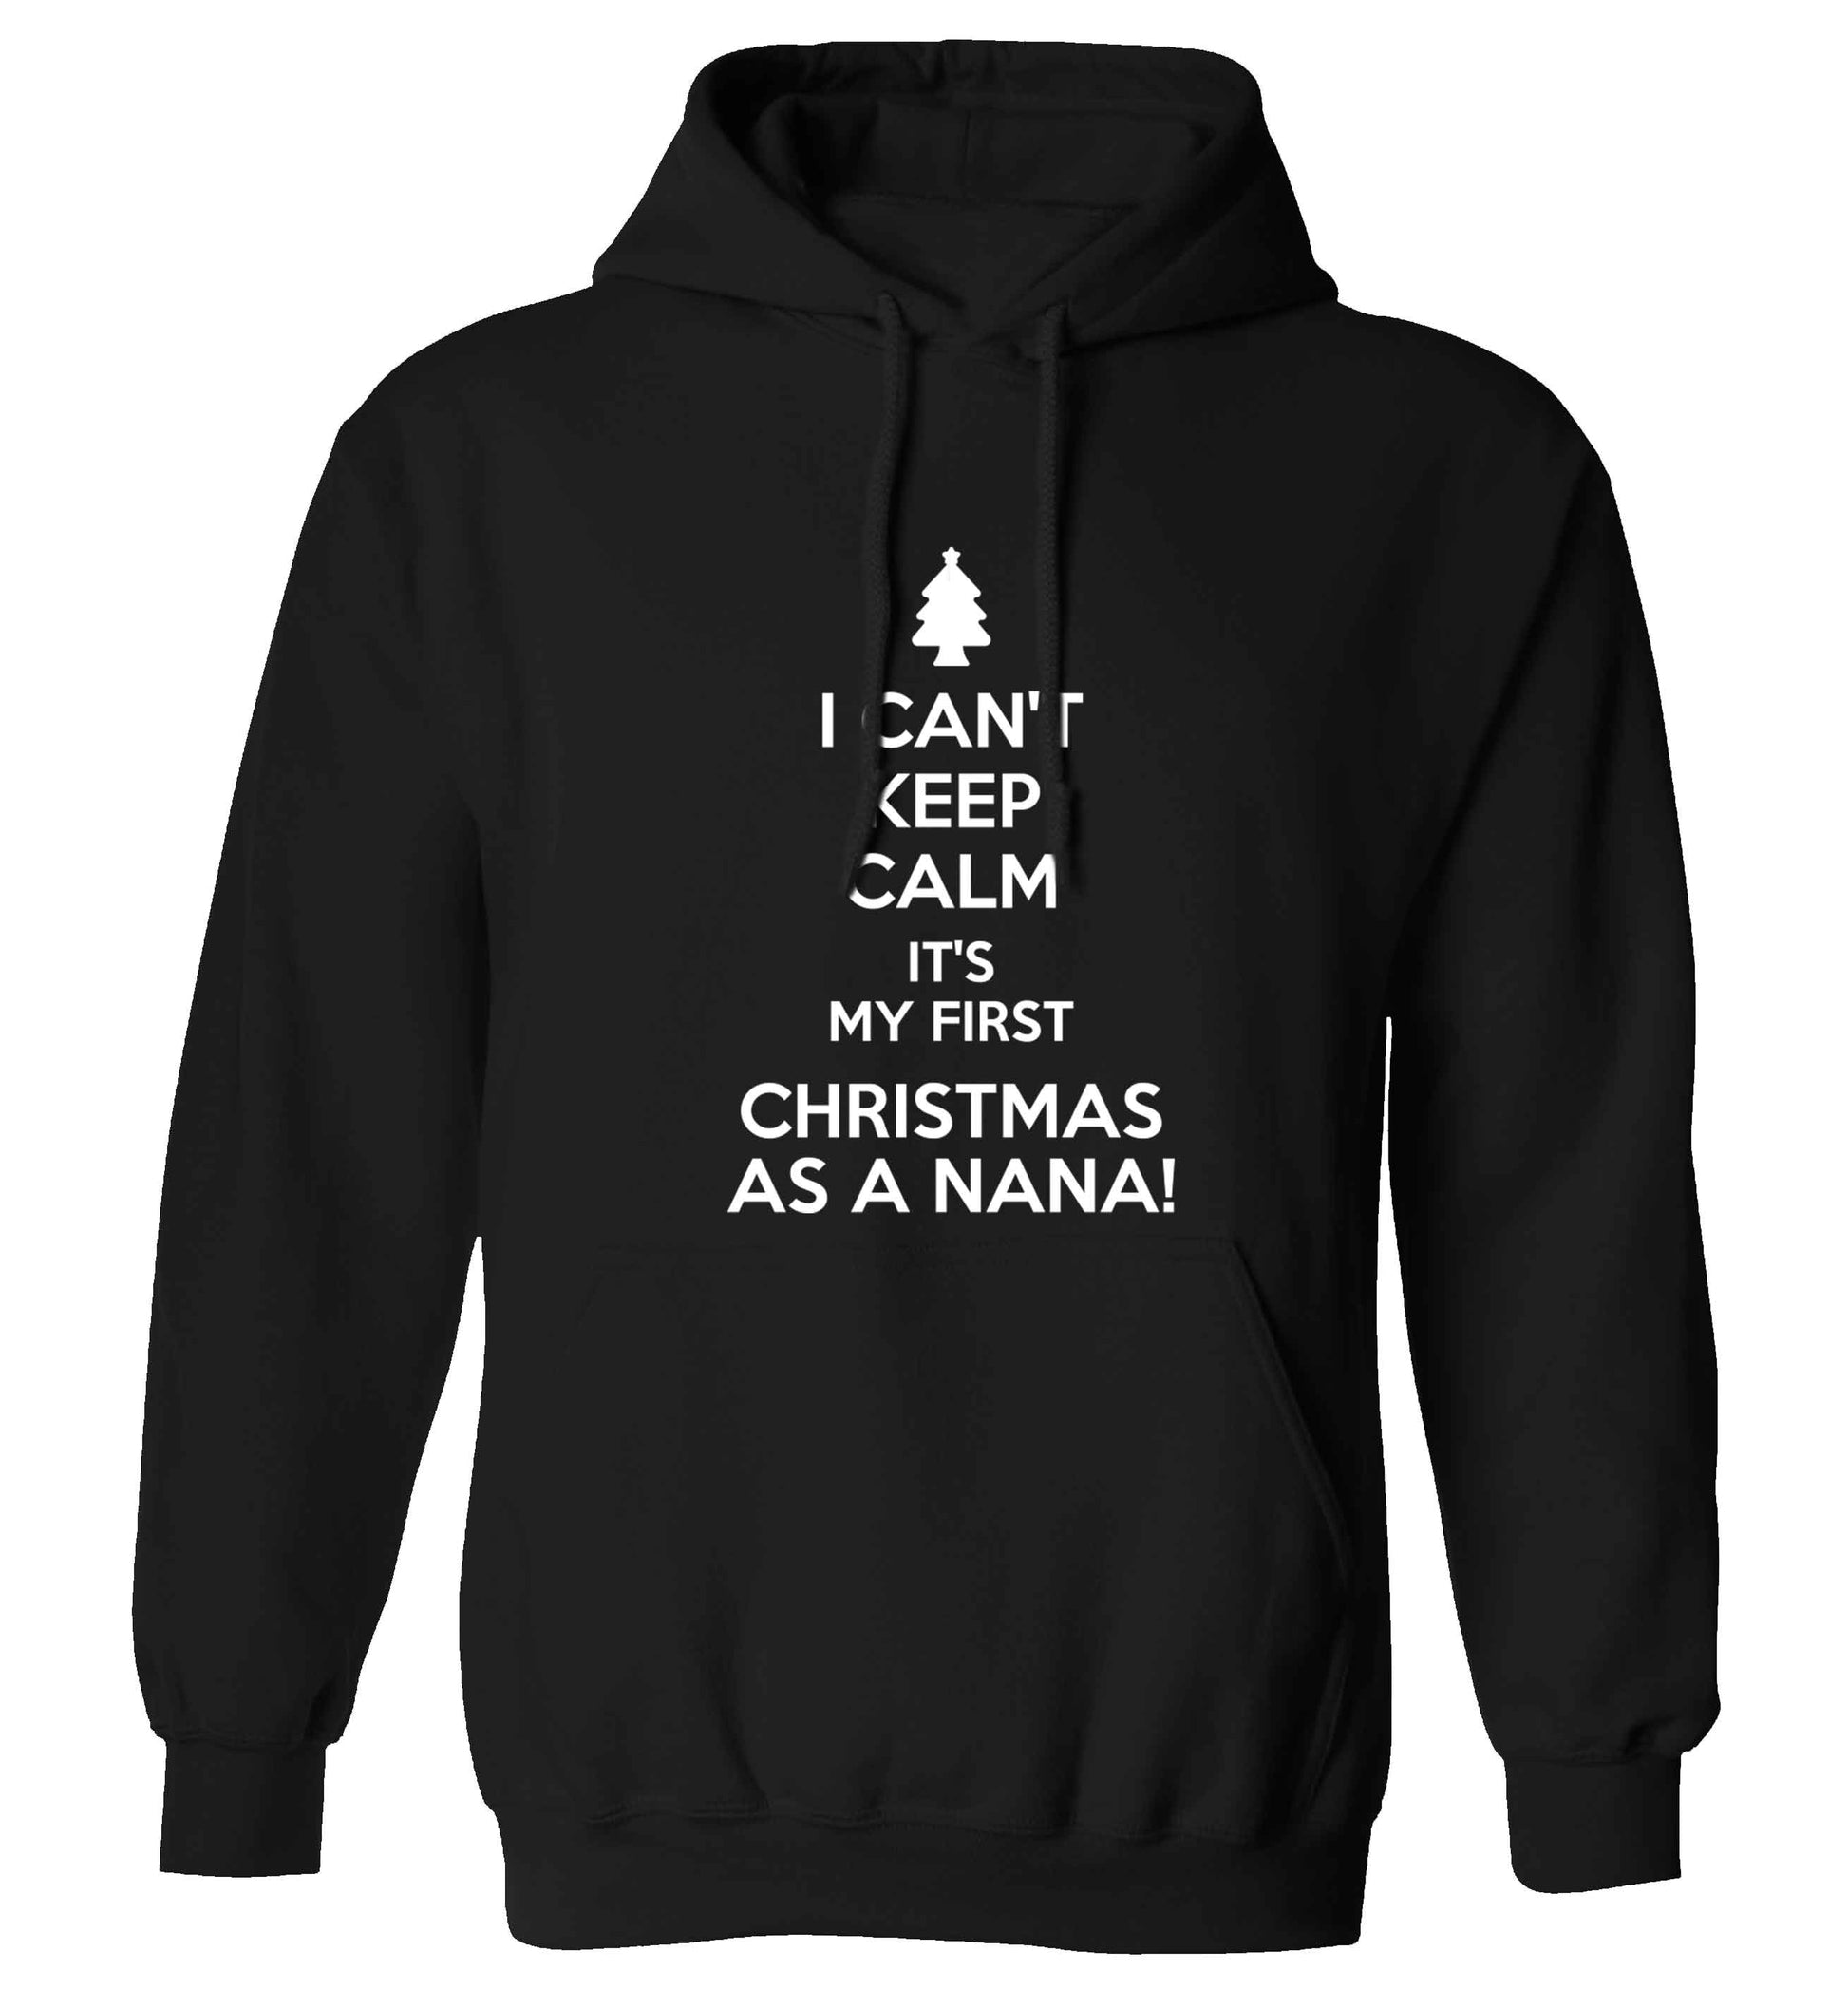 I can't keep calm it's my first Christmas as a nana! adults unisex black hoodie 2XL